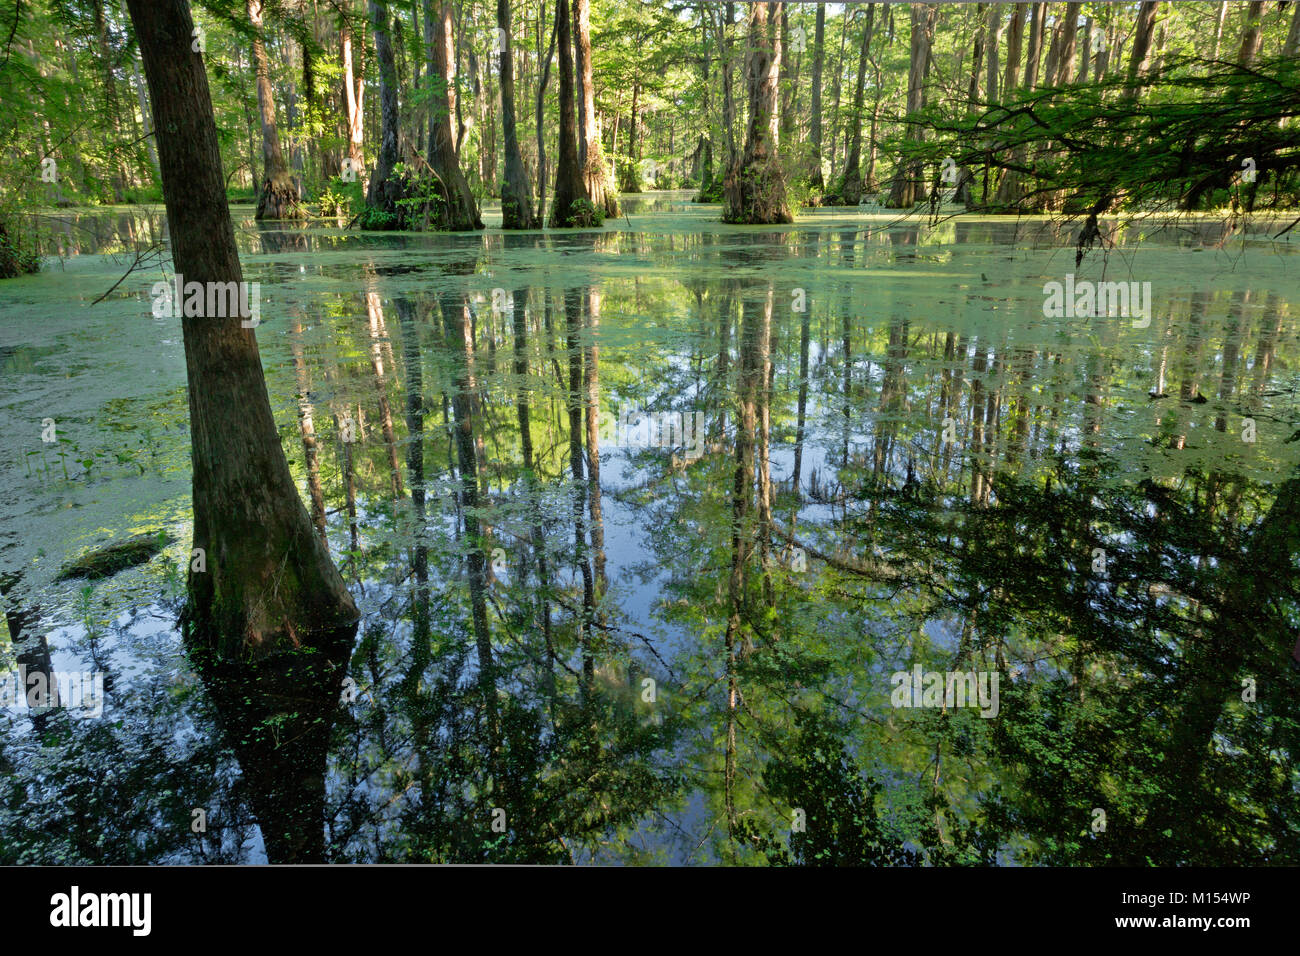 NC01470-00...NORTH CAROLINA - Bald cypress and tupalo gum trees reflecting in the still waters of Merchant Millpond; at Merchant Millpond State Park. Stock Photo